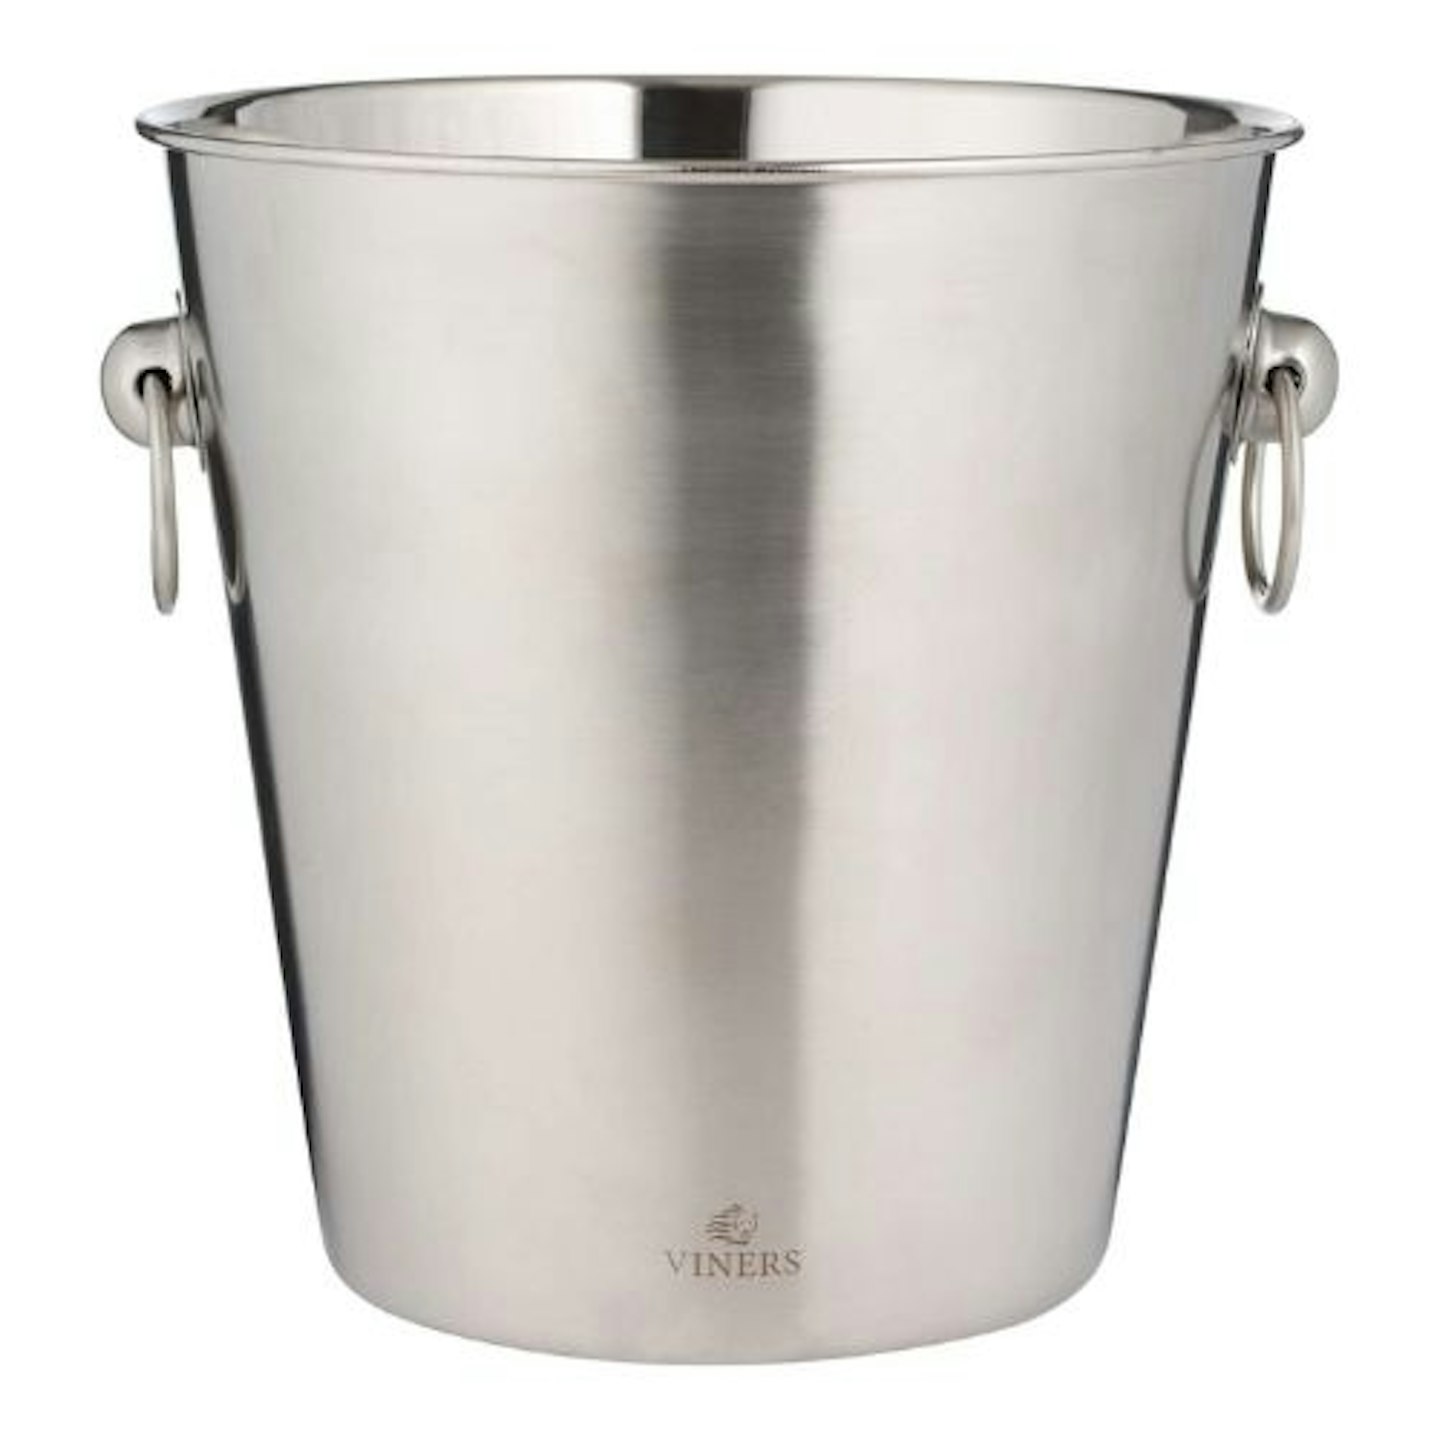 Rayware 0302.215 Viners Barware Champagne Bucket Silver 4 L, Stainless Steel